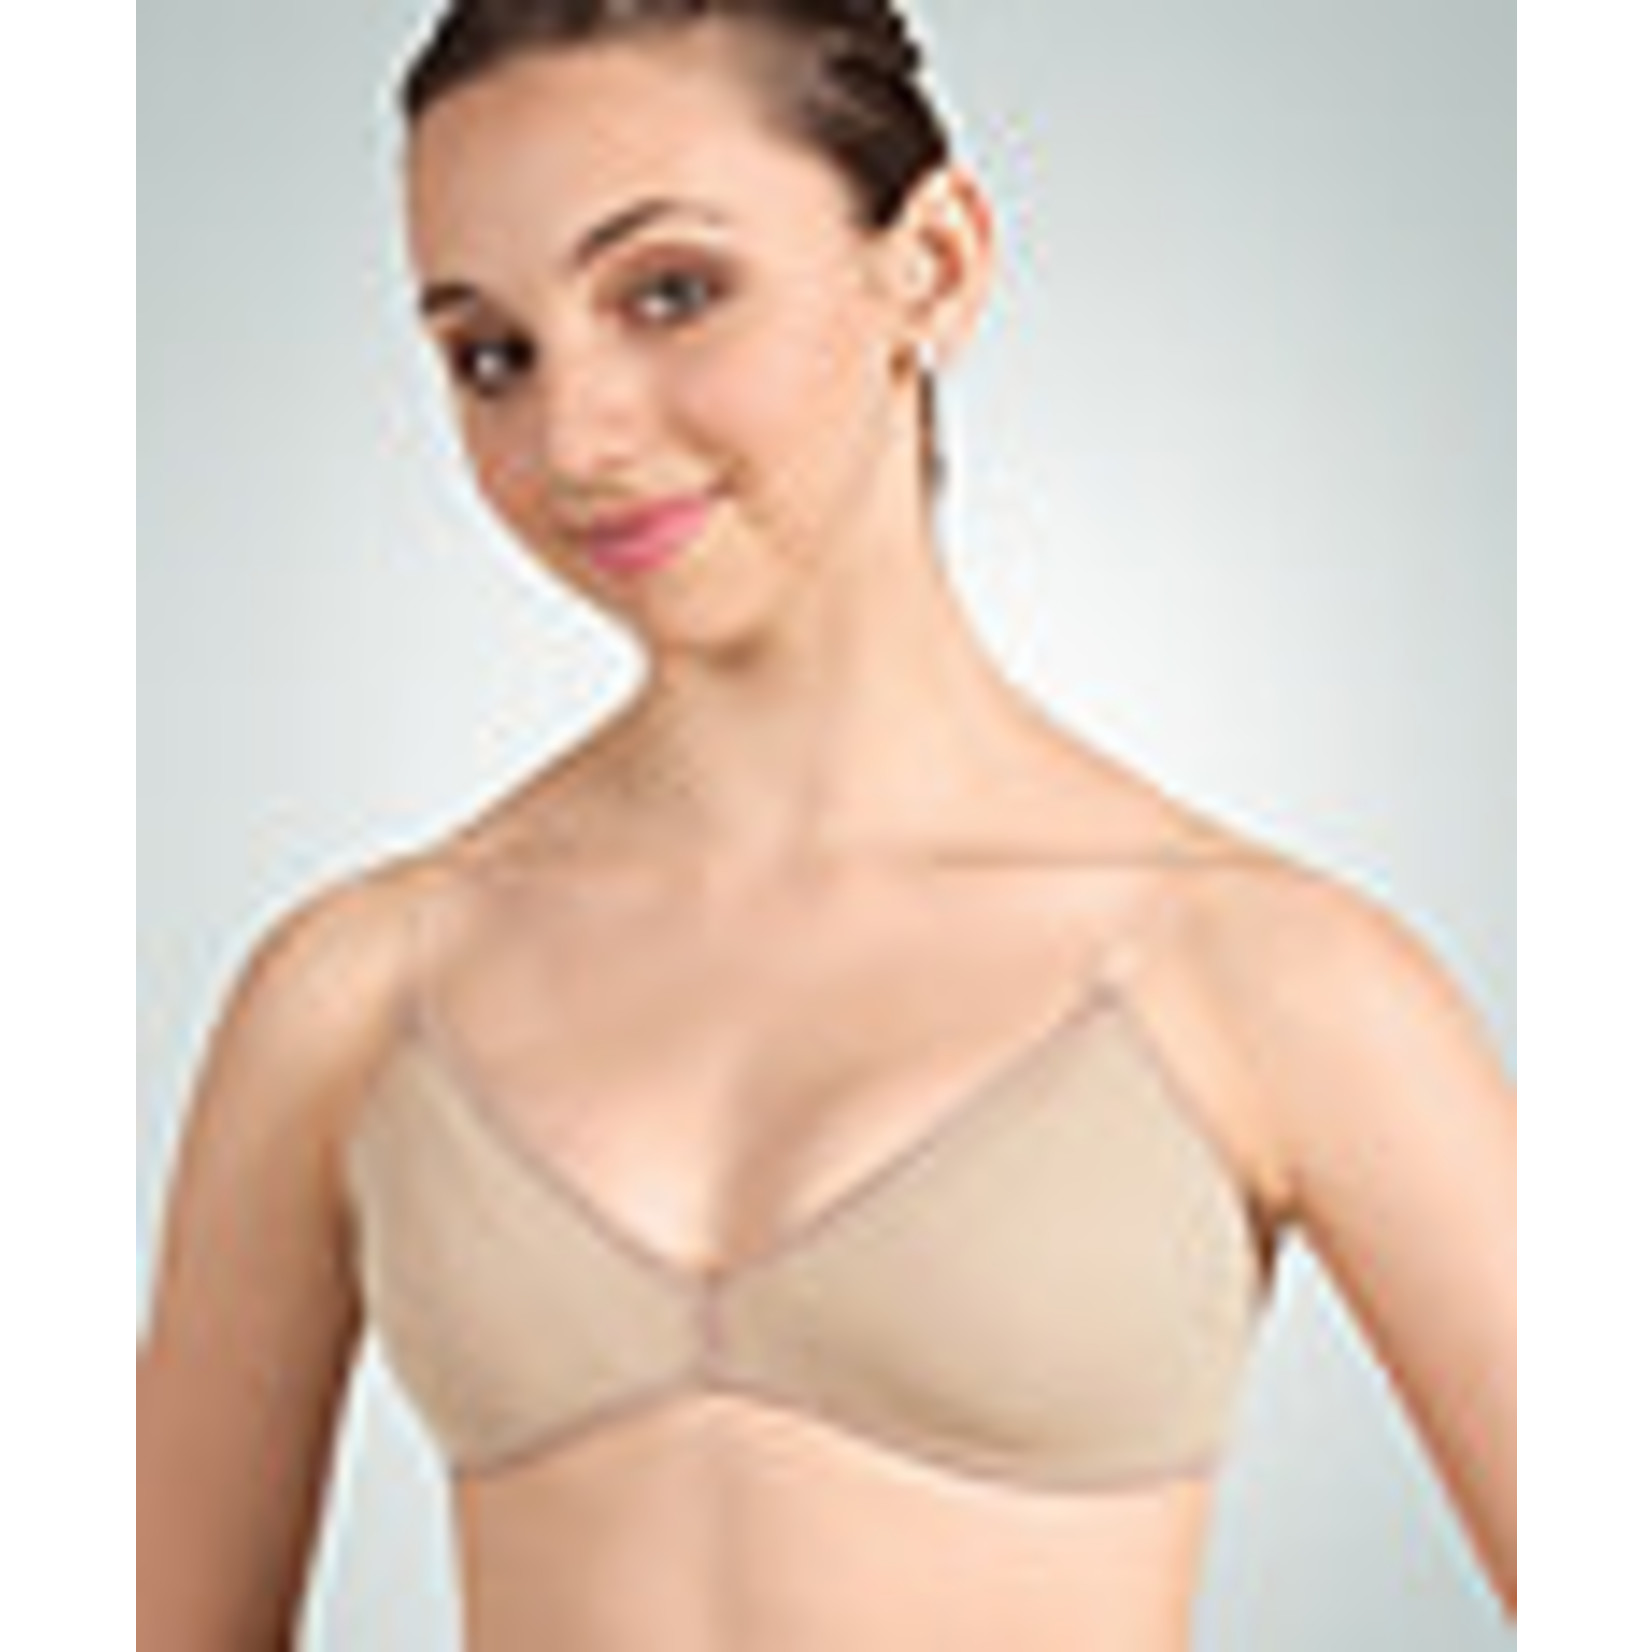 Body Wrappers Body Wrappers 287 Womens Convertible Deep V Padded Bra